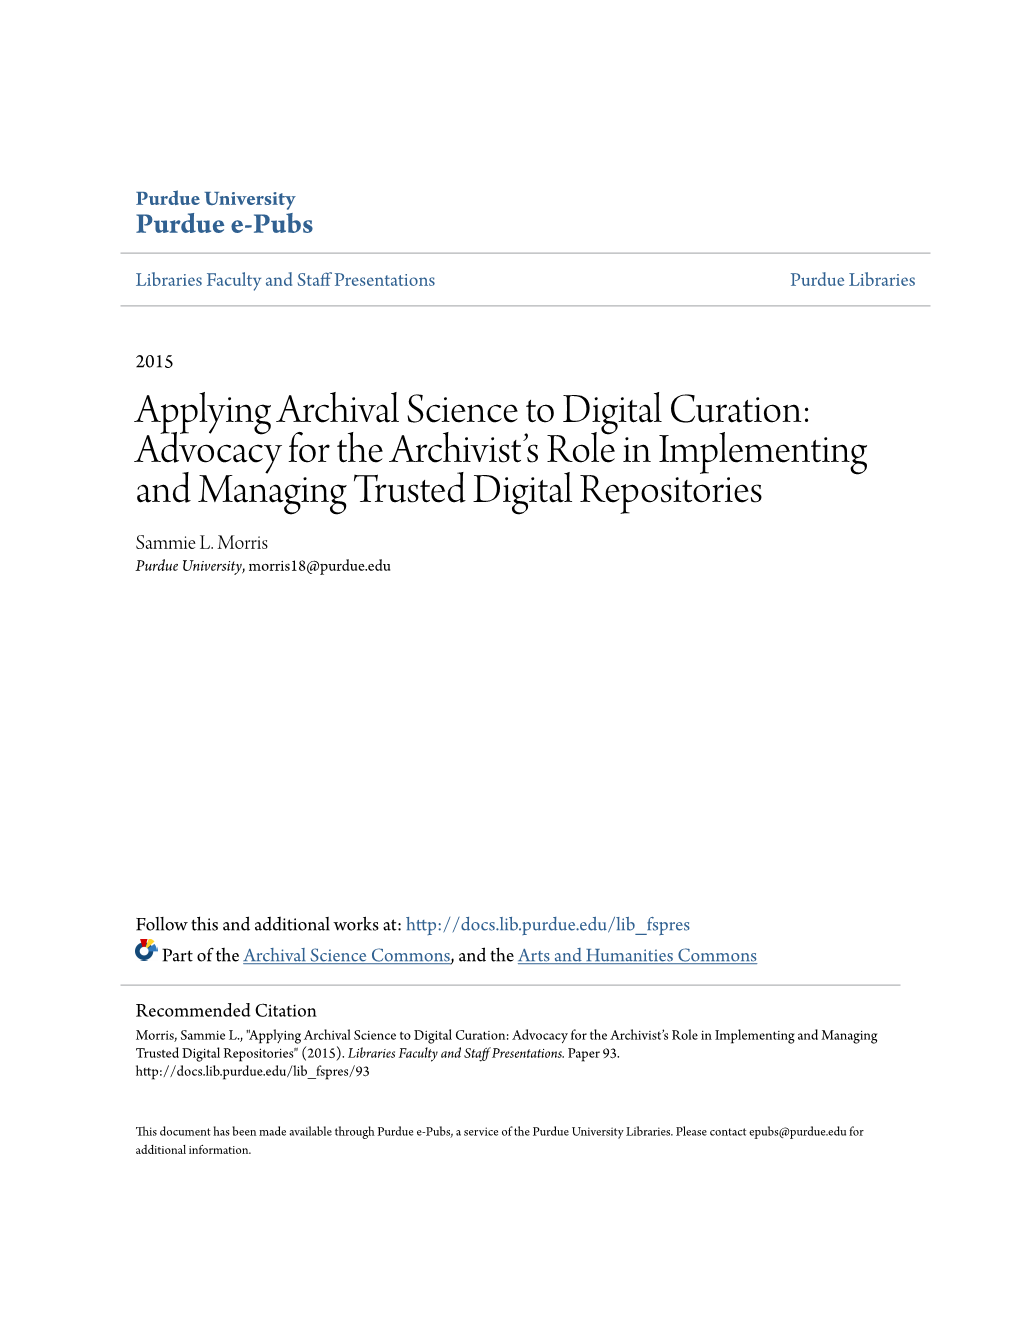 Applying Archival Science to Digital Curation: Advocacy for the Archivist’S Role in Implementing and Managing Trusted Digital Repositories Sammie L